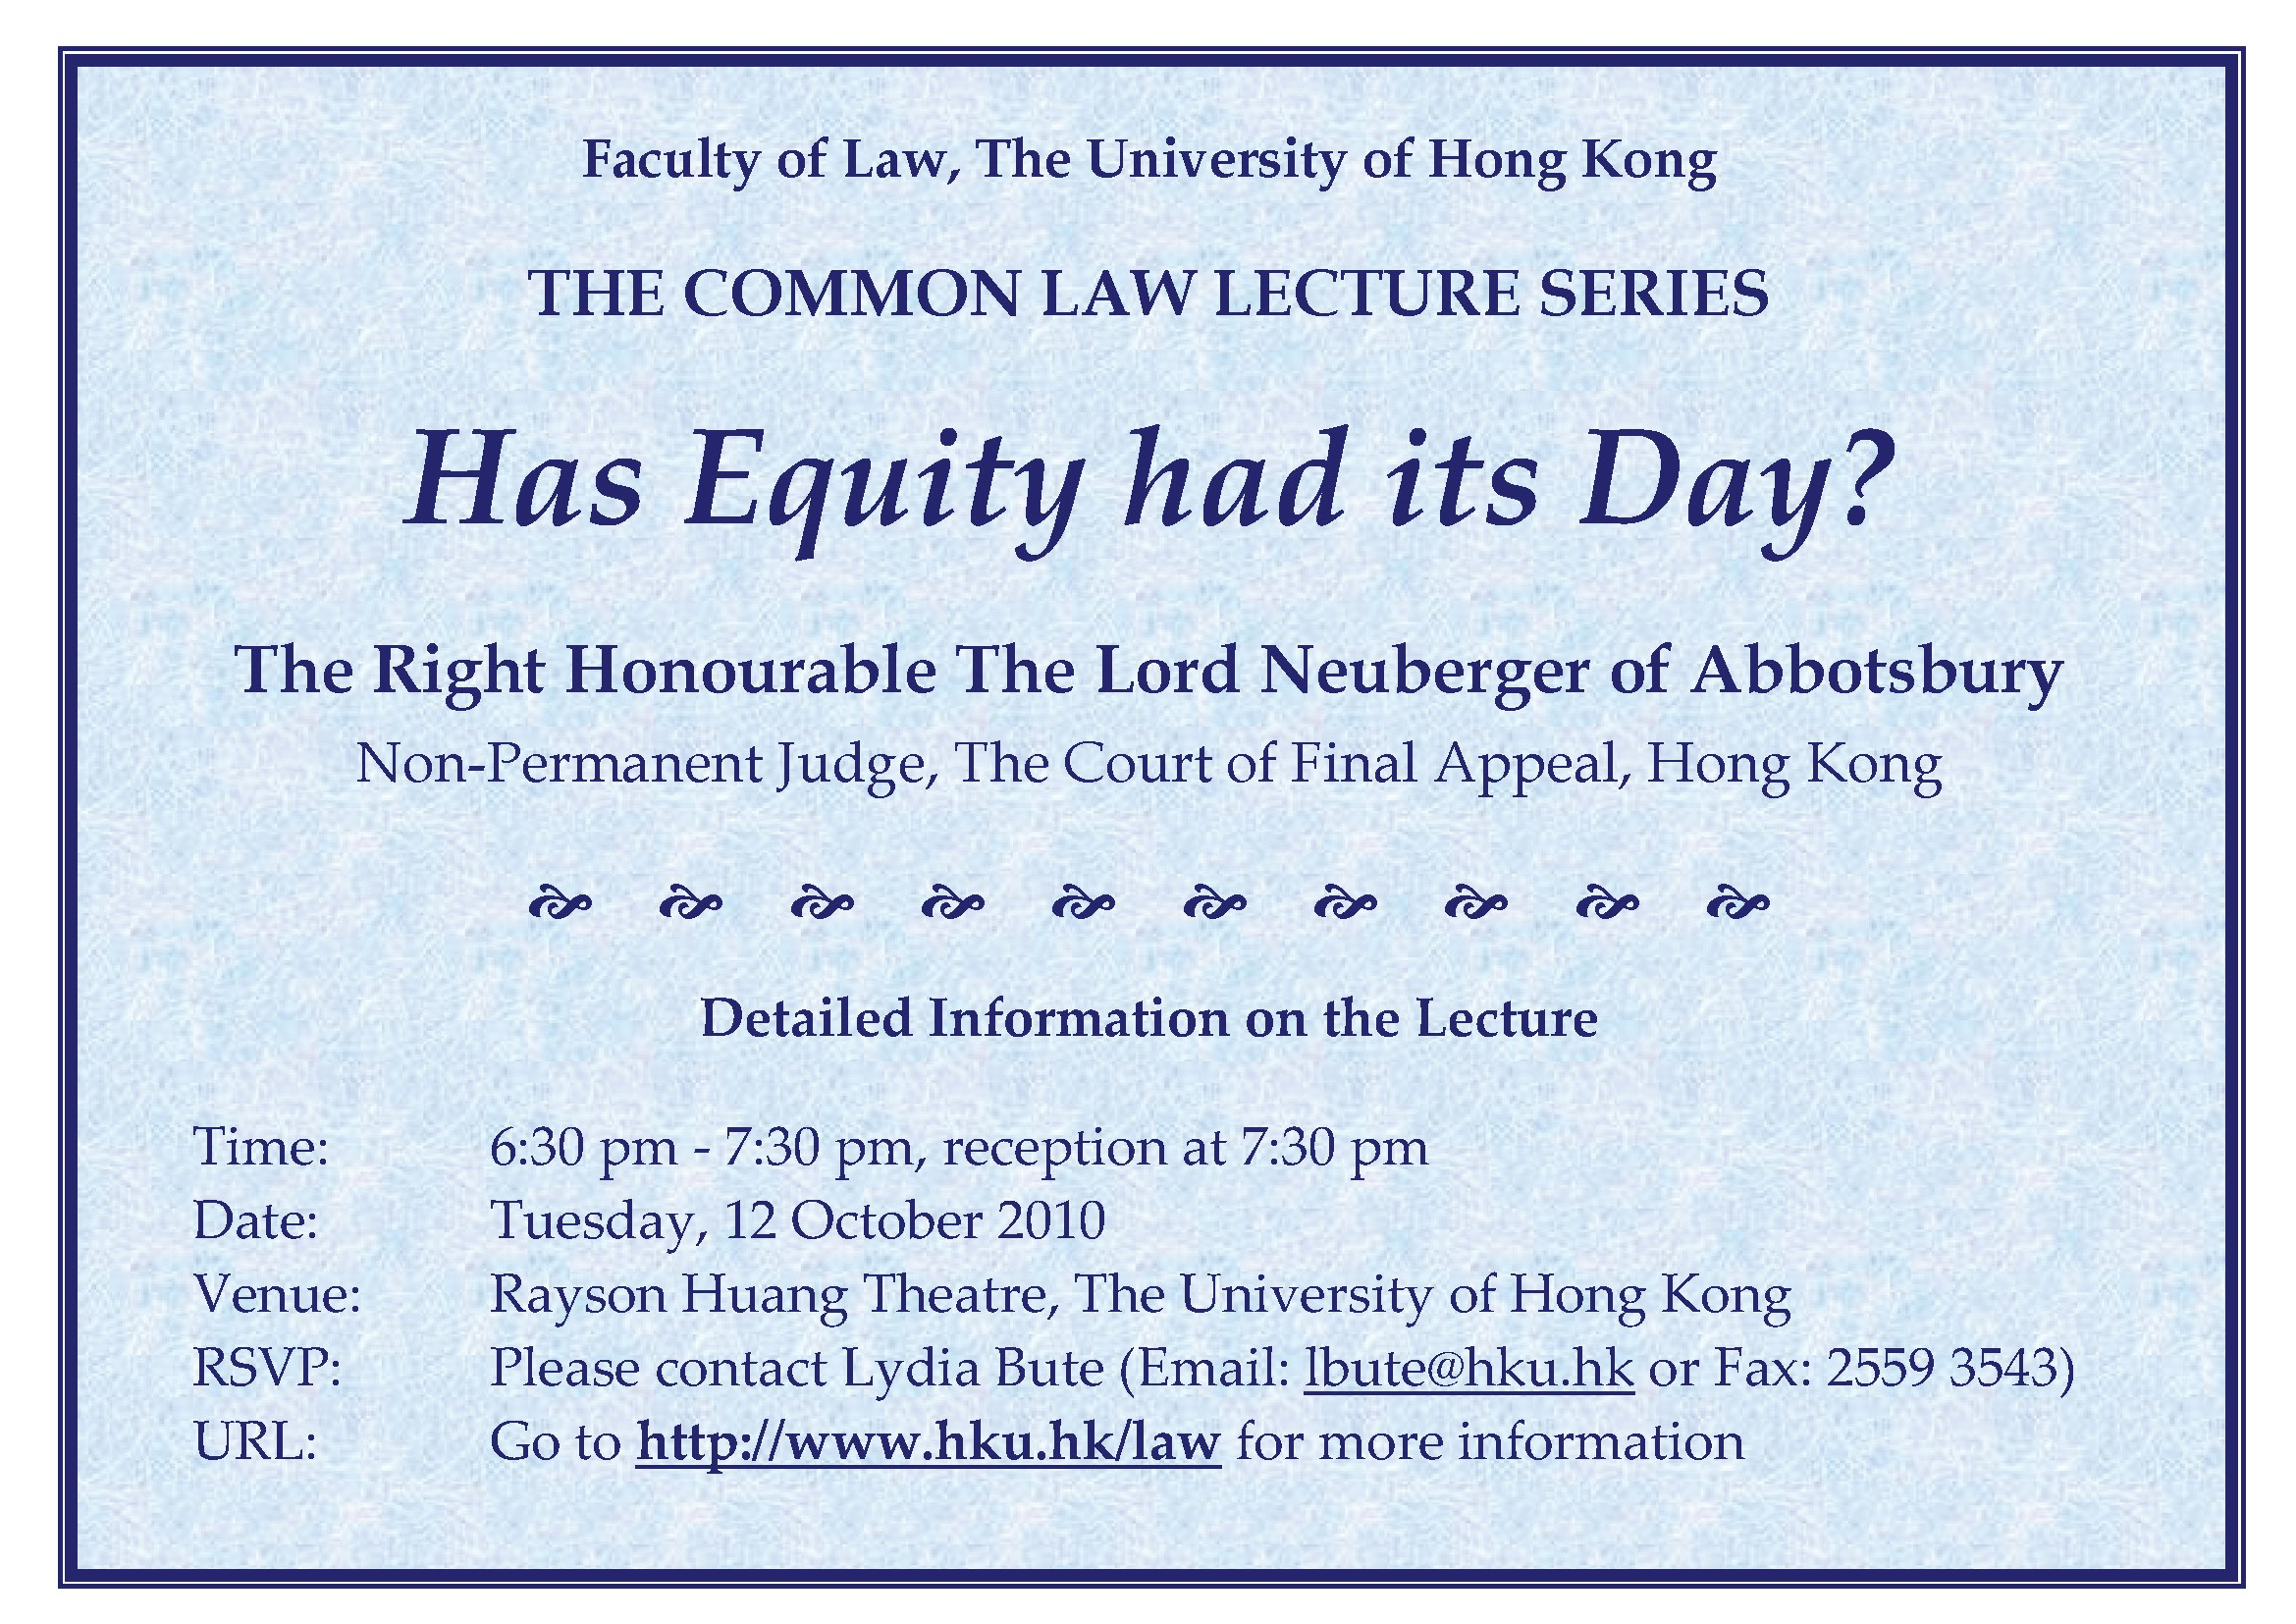 THE COMMON LAW LECTURE SERIES